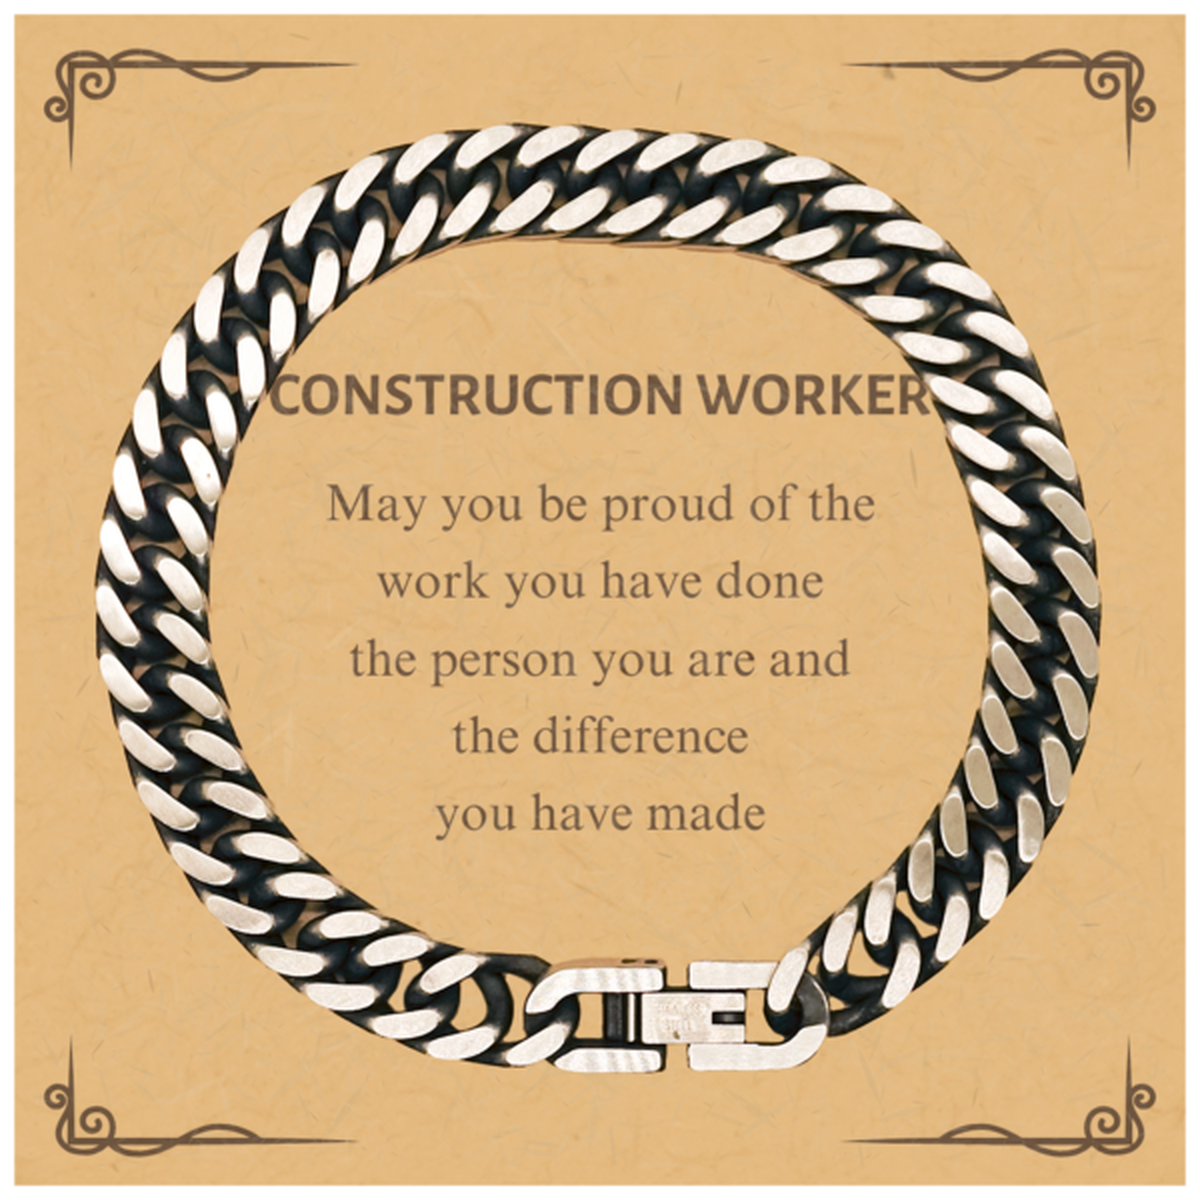 Construction Worker May you be proud of the work you have done, Retirement Construction Worker Cuban Link Chain Bracelet for Colleague Appreciation Gifts Amazing for Construction Worker